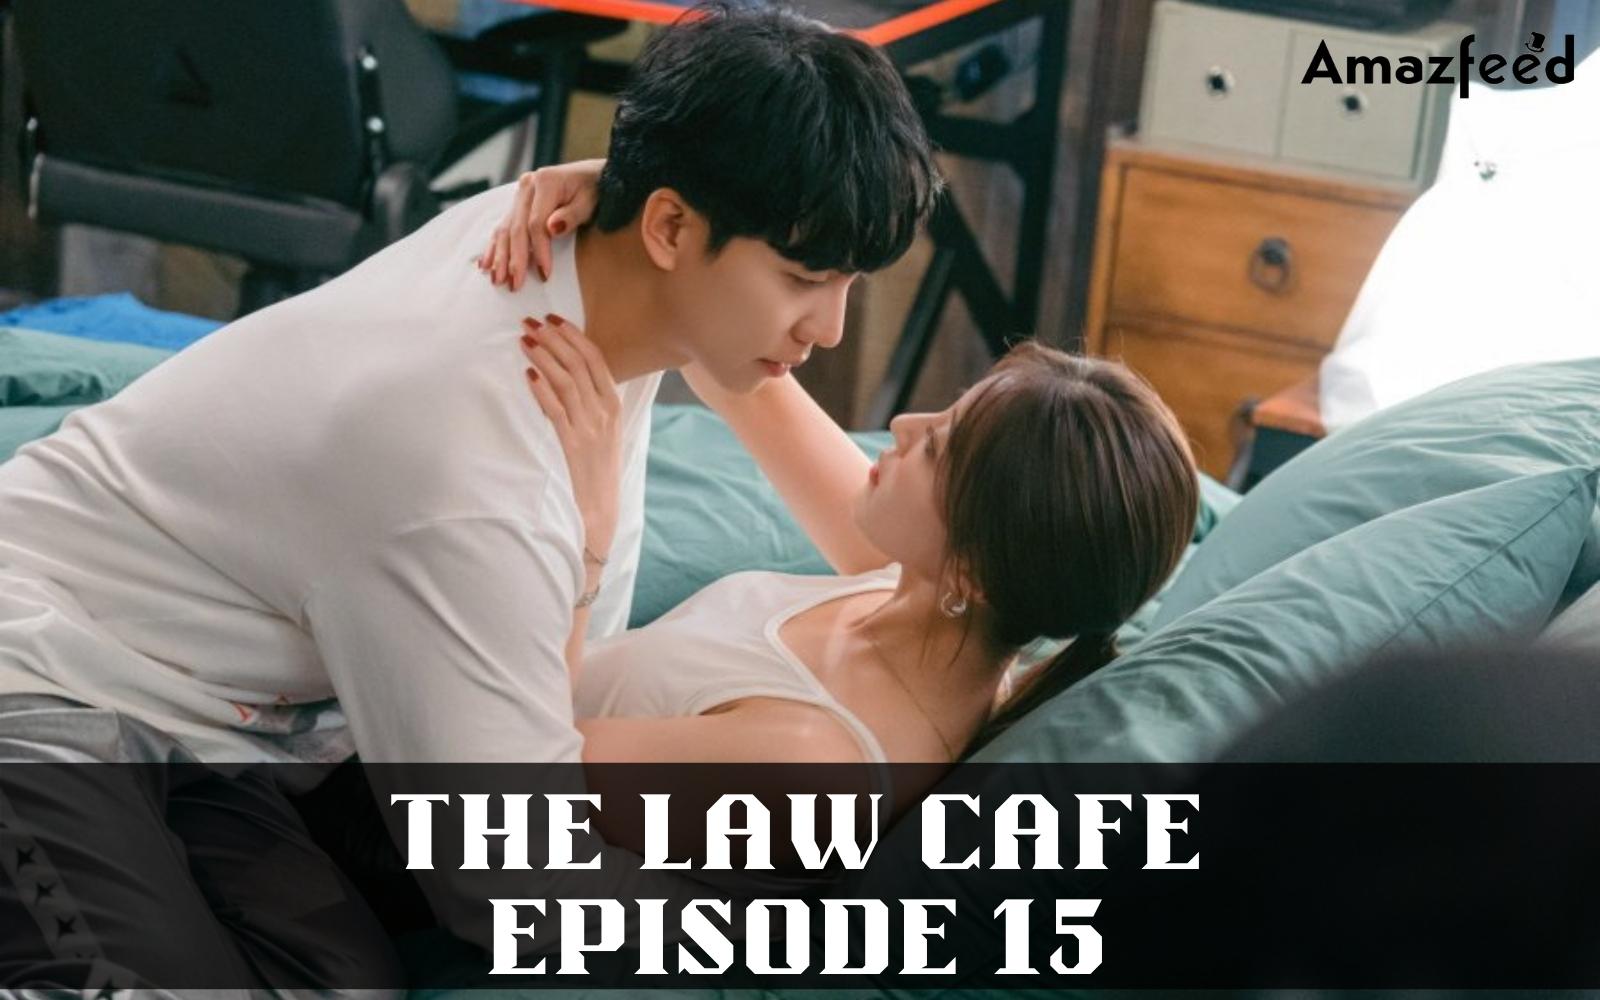 The Law Cafe Episode 15 : Recap, Spoiler, Countdown, Release Date, Review & Where to Watch